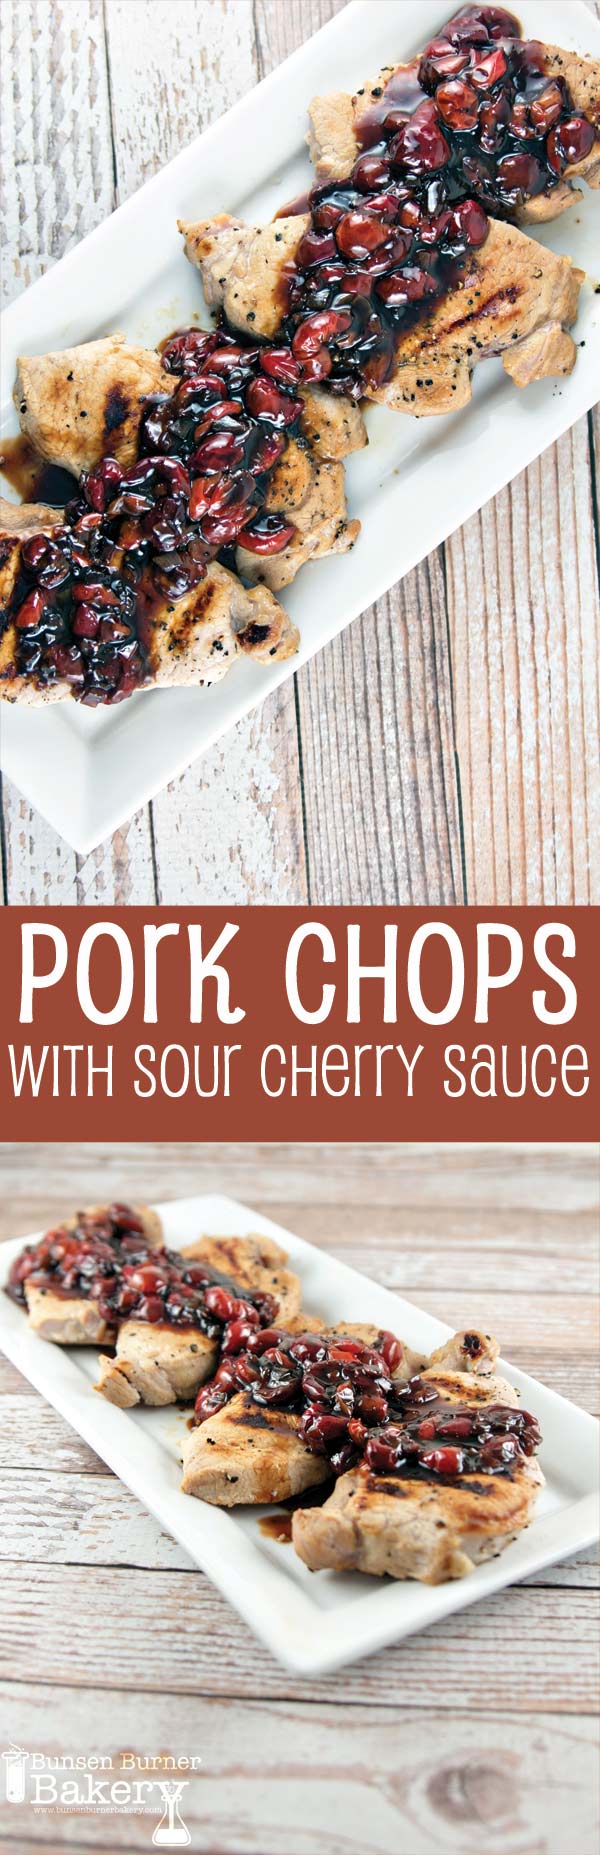 Pan-Grilled Pork Chops with Sour Cherry Sauce: perfectly brined pork chops with a delicious sweet and sour sauce. {Bunsen Burner Bakery}